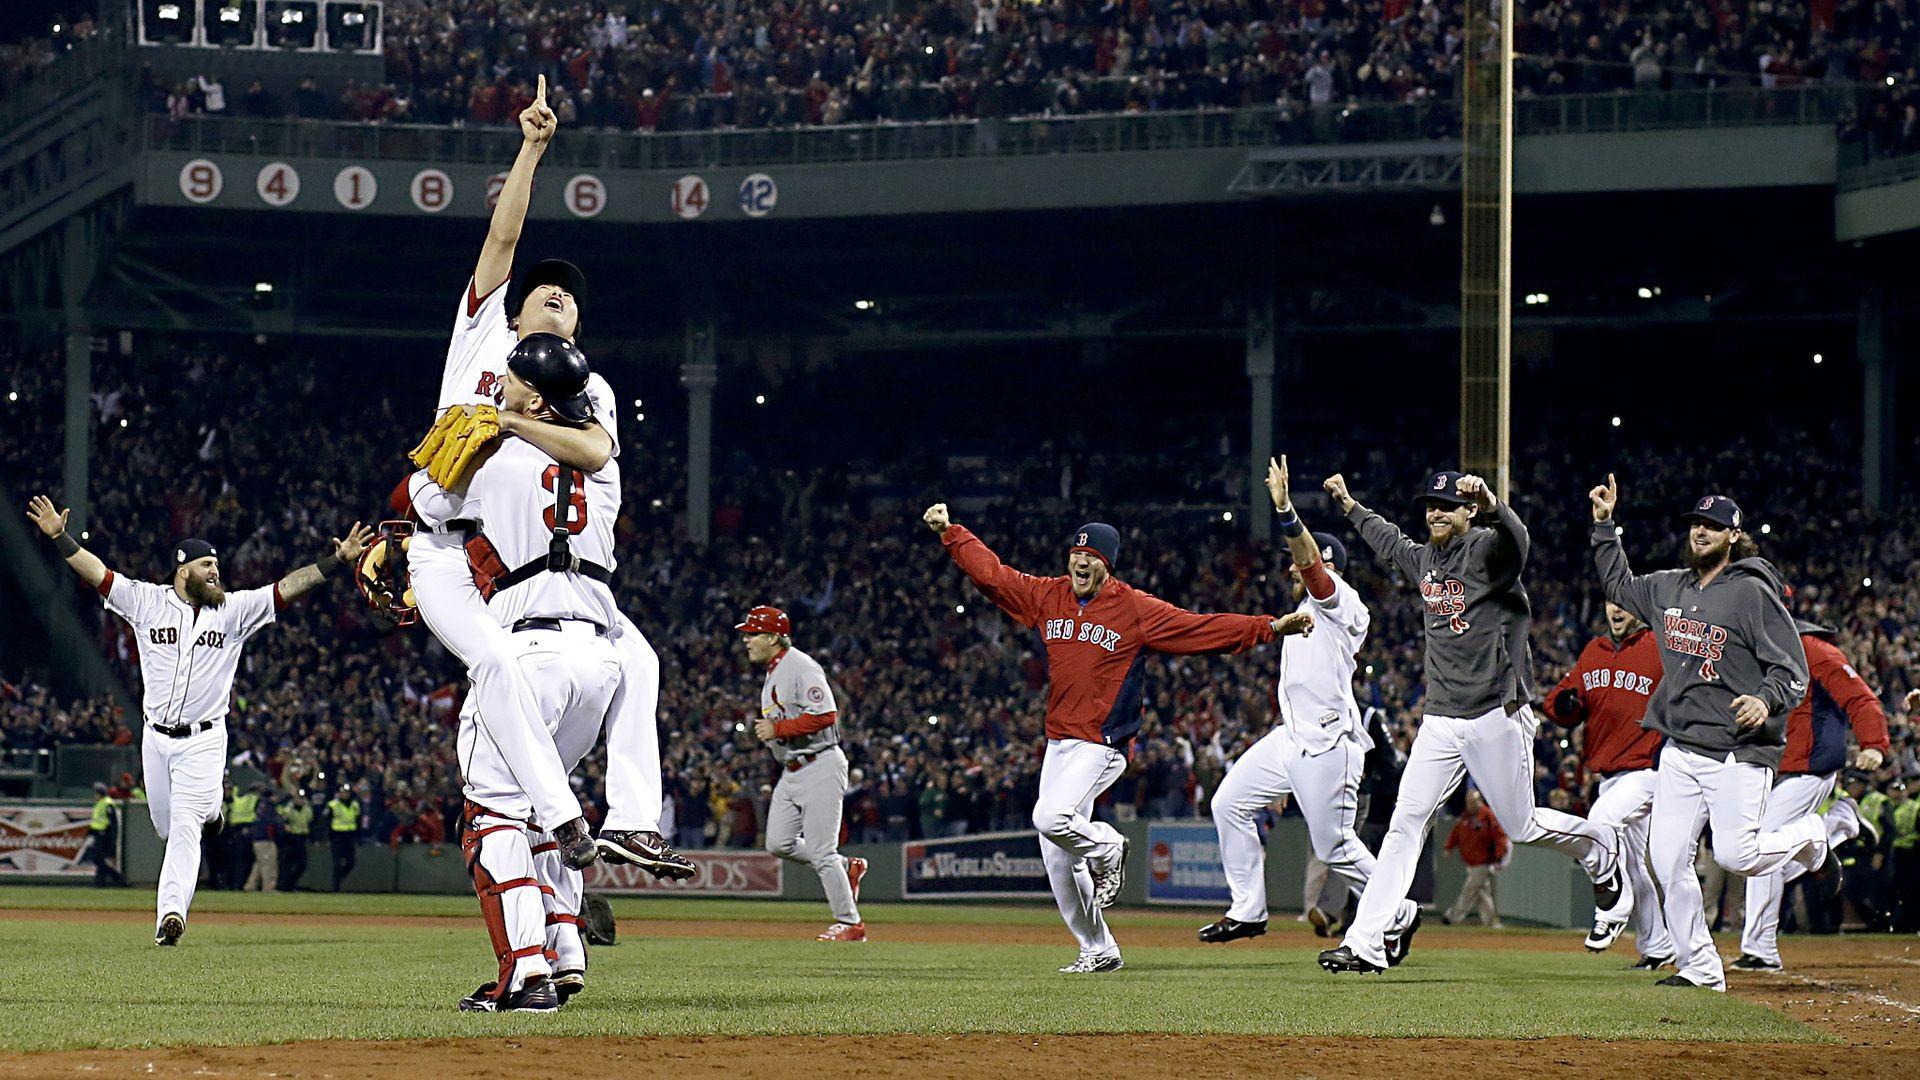 Boston Red Sox Free Wallpaper download - Download Free Boston Red Sox HD  Wallpapers to your mobile phone or tablet